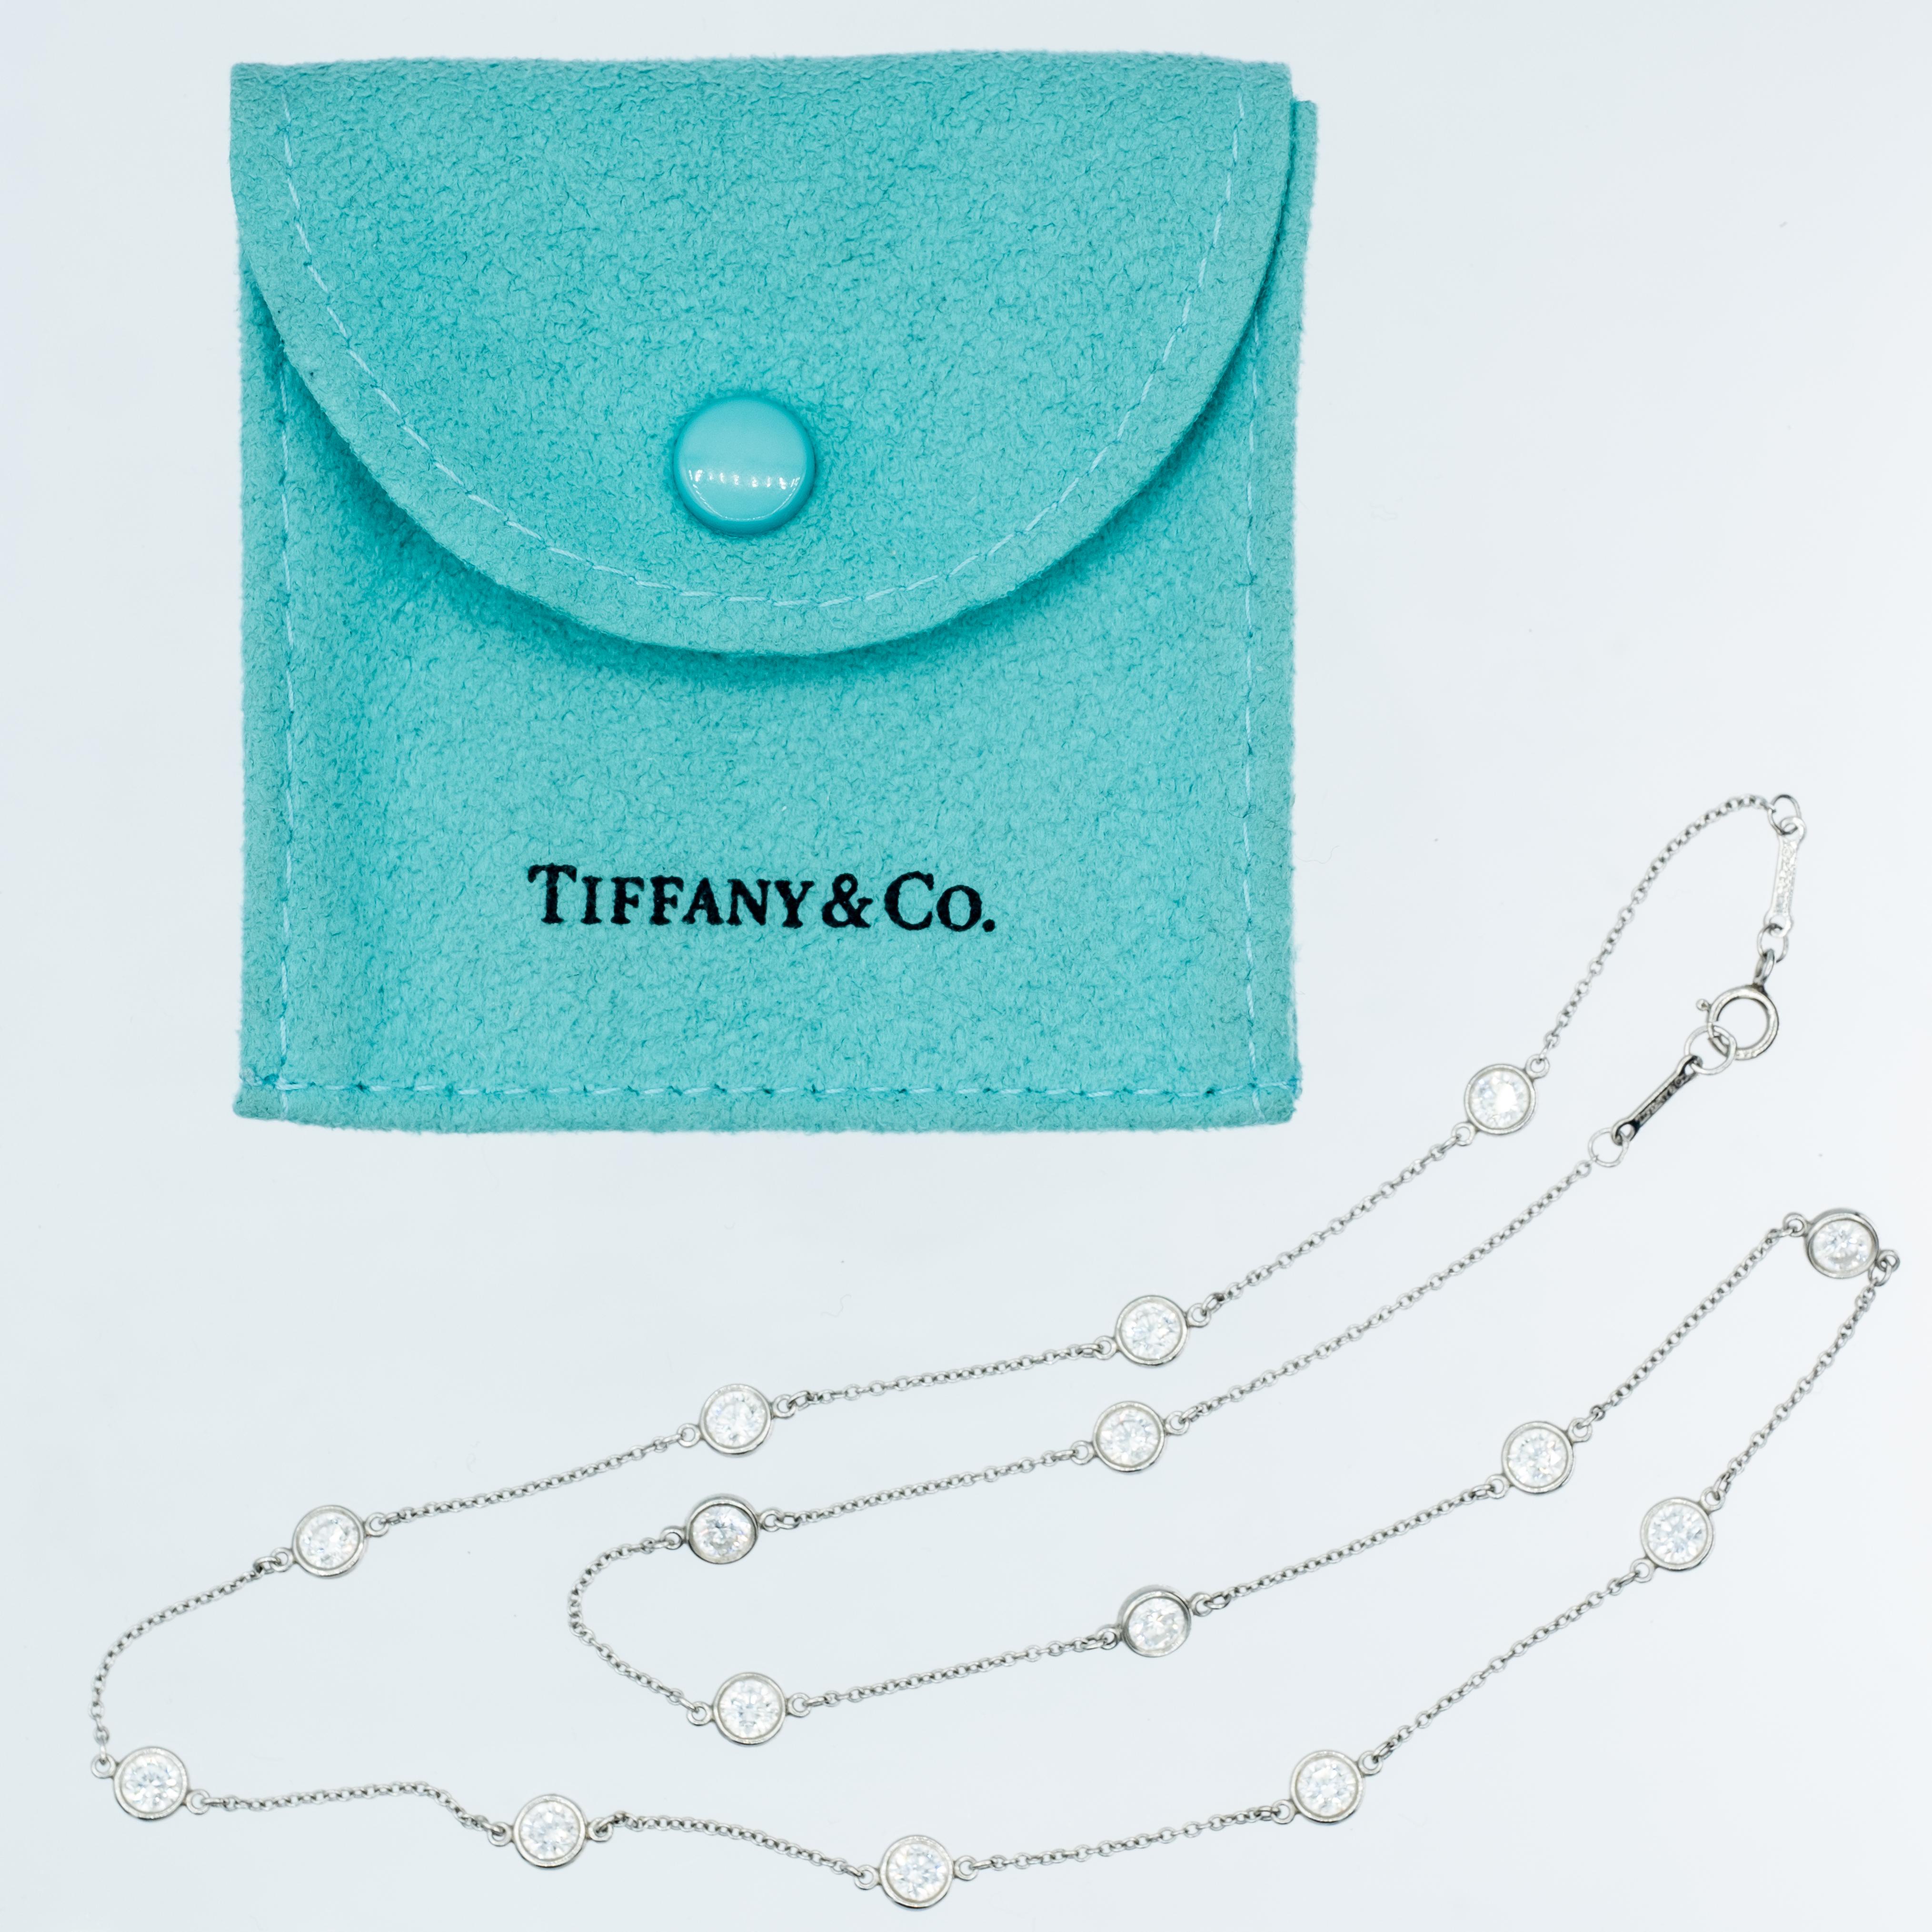 The Diamonds by the Yard necklace, a signature piece from Tiffany & Co., is not just jewelry; it's a narrative woven by the iconic Elsa Peretti. Every link in the platinum chain tells a story of Peretti's innovative spirit, punctuated by fifteen